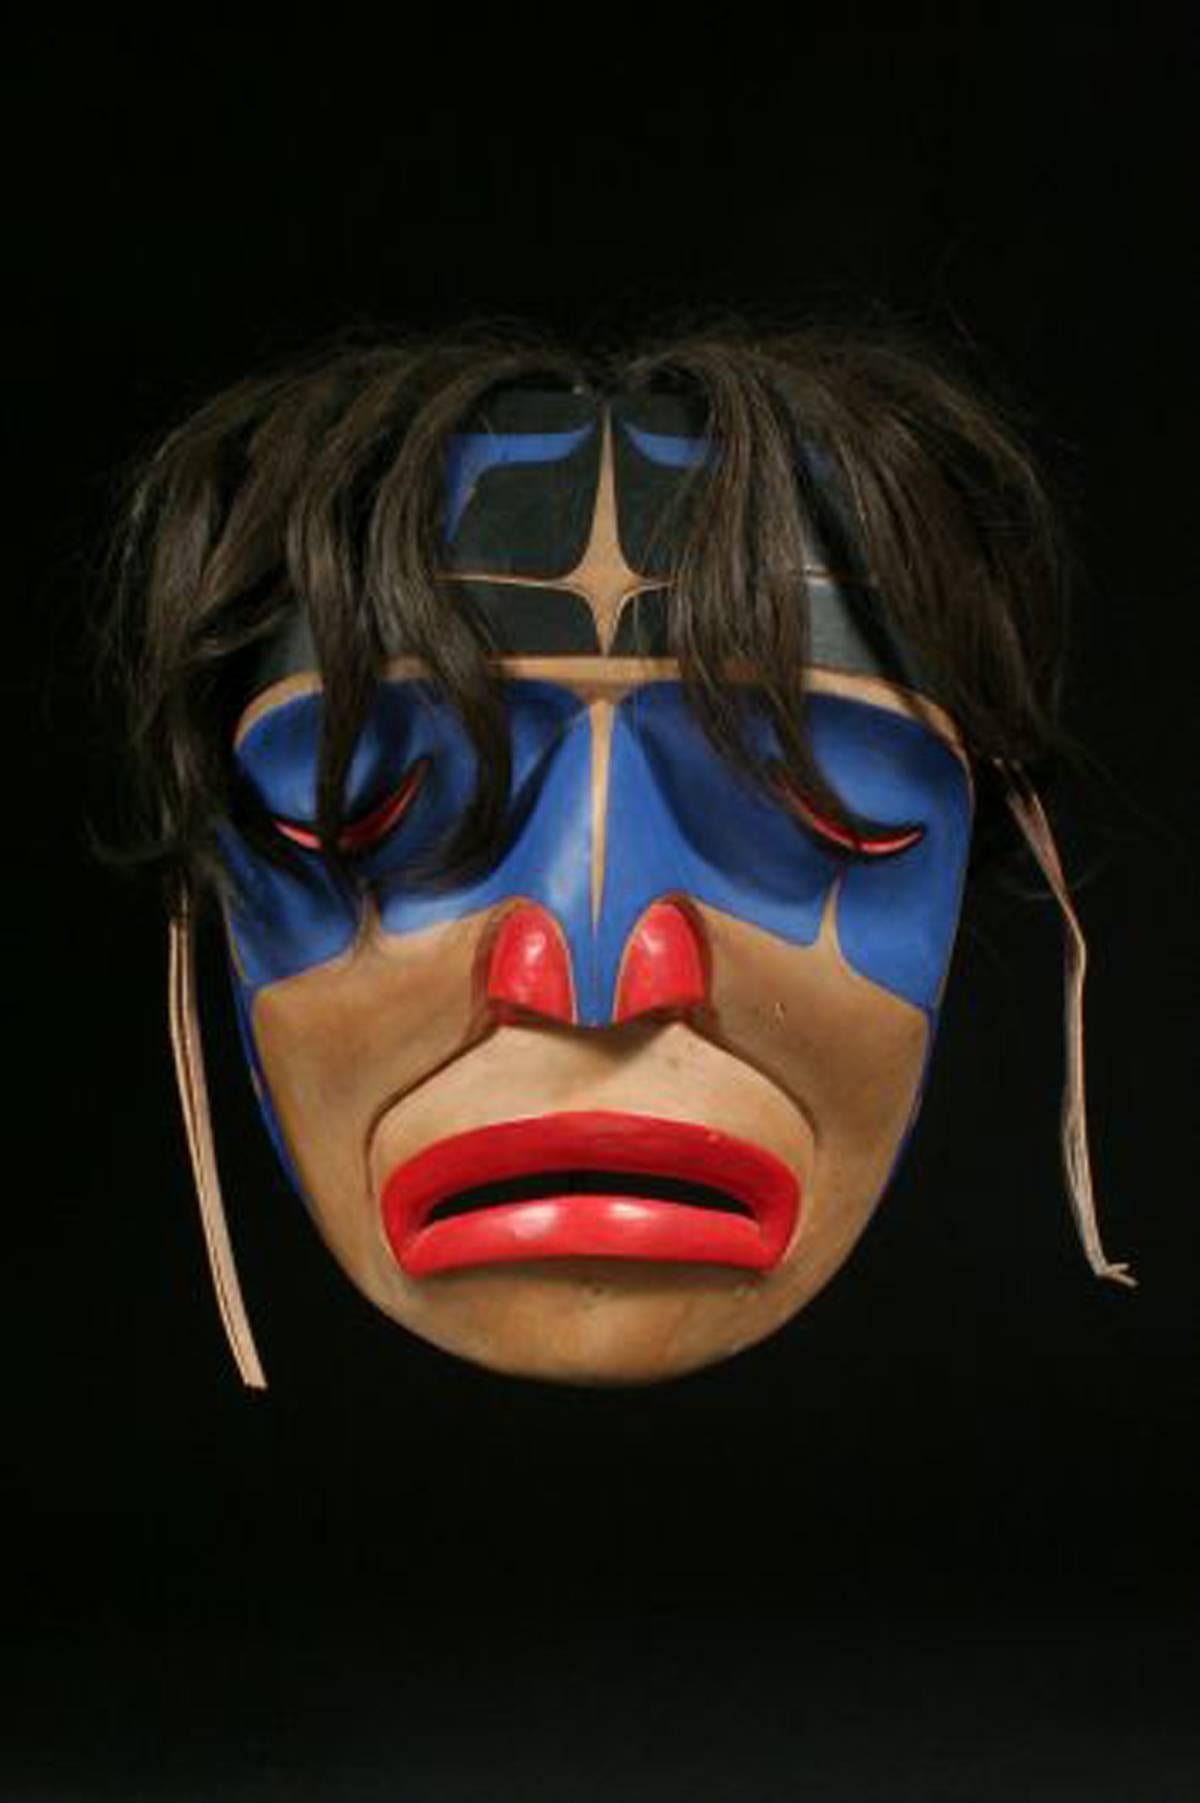 20th century North West Coast American Indian signed Tribal Crying Mask George Hunt Jr.
Kwakiutl, British Columbia
Cedar, horse hair, leather, paint

A striking, graphic mask with the distinct North West Coast styling of clean lines and bold use of